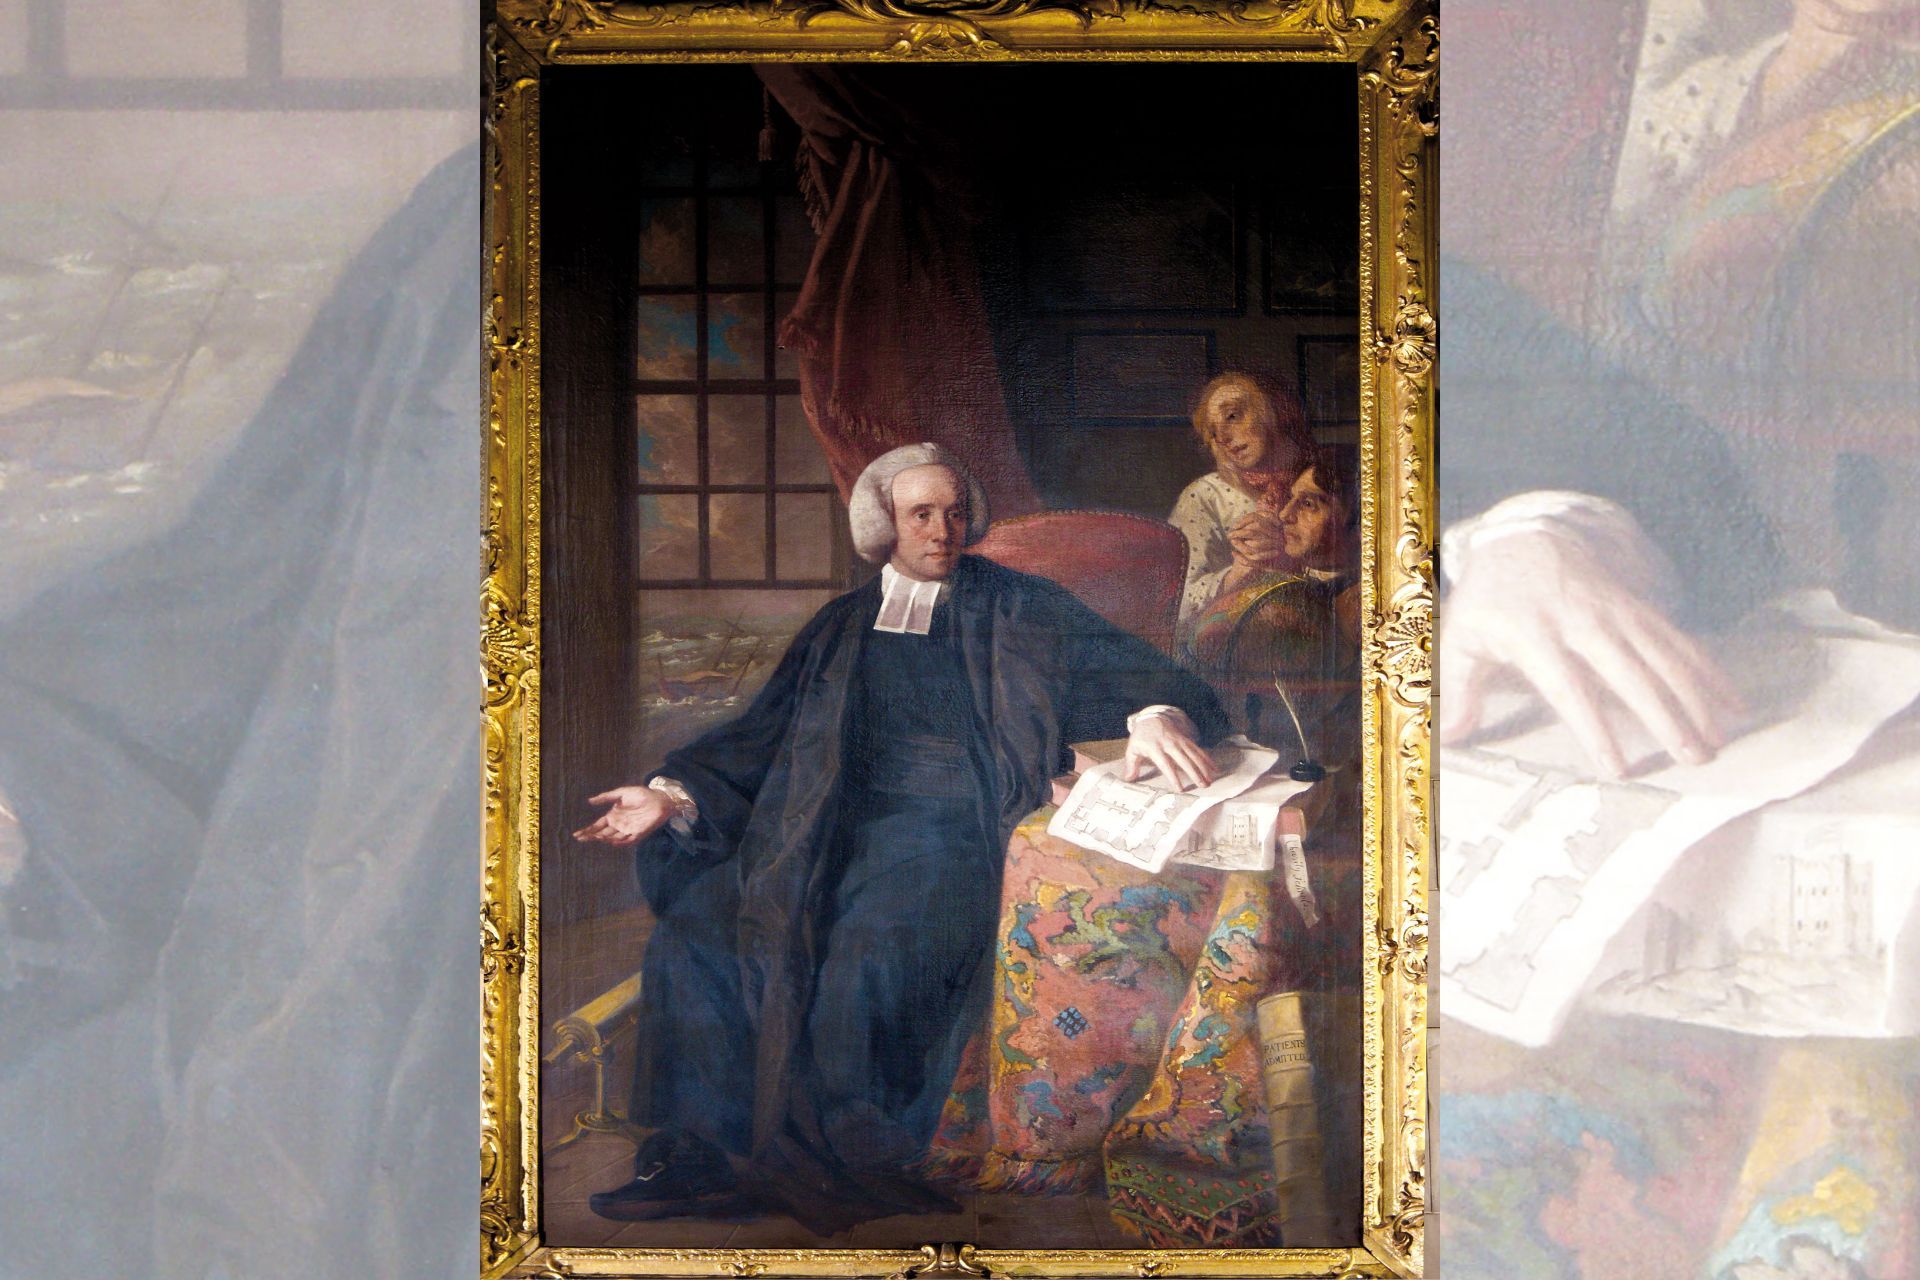 Portrait of John Sharp, Archdeacon of Northumberland (1723-1792), painted by Benjamin West (around 1780), which is still at Bamburgh Castle. Photo credit: Nick McCann